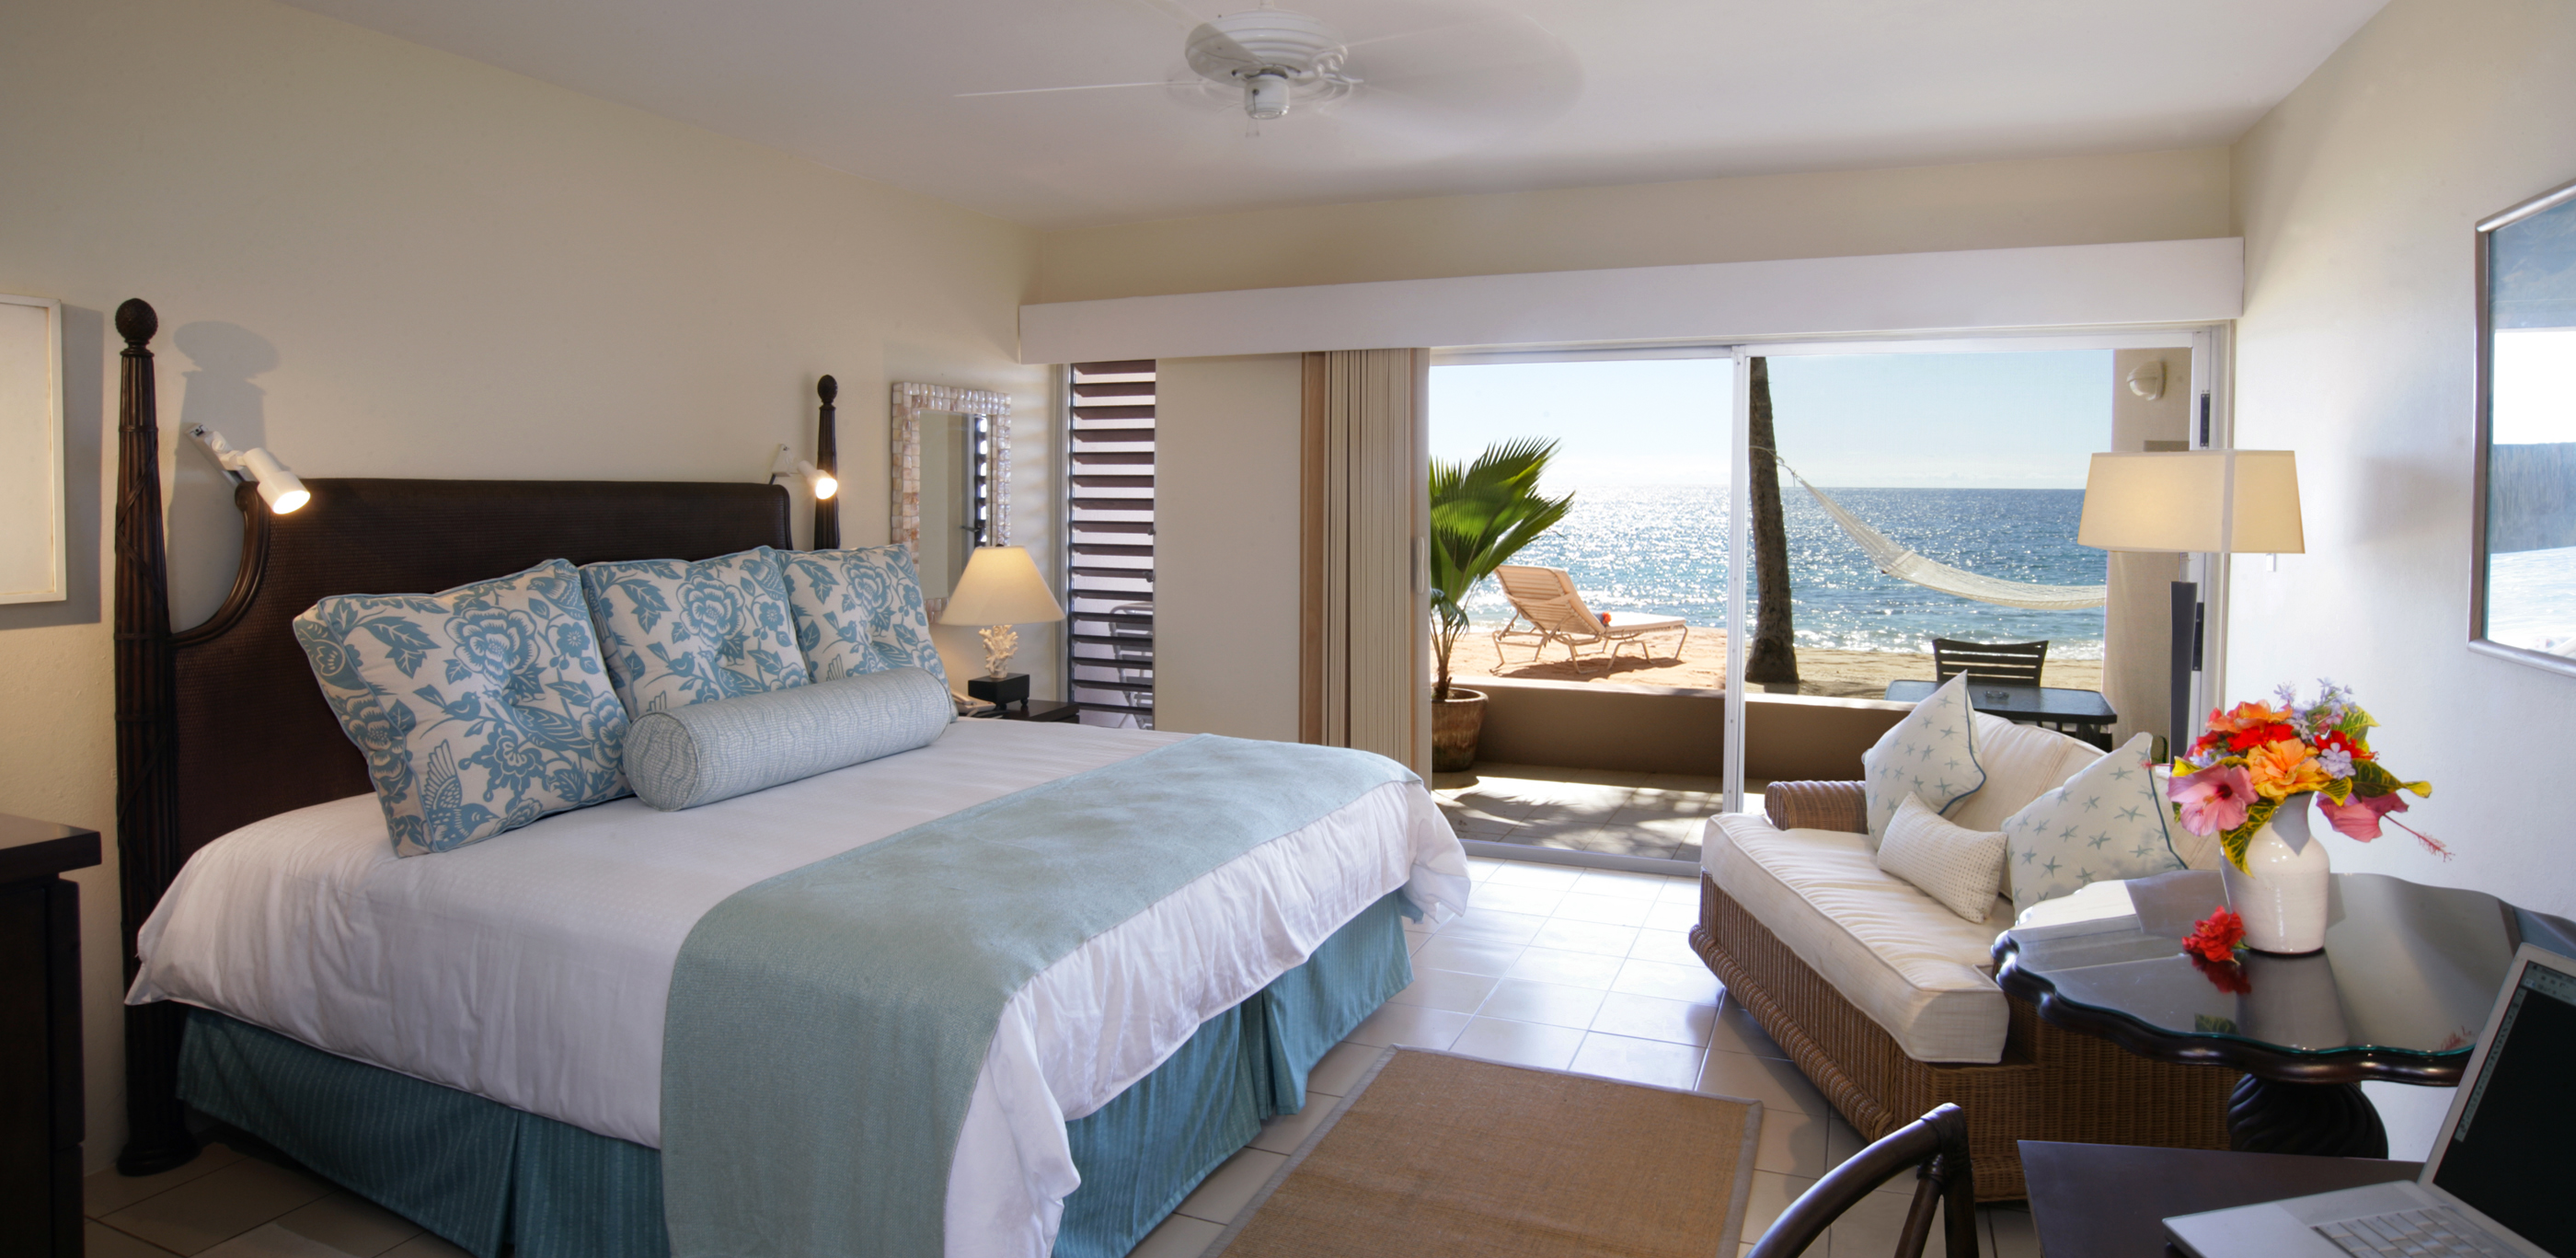 Deluxe room at Curtain Bluff, Antigua